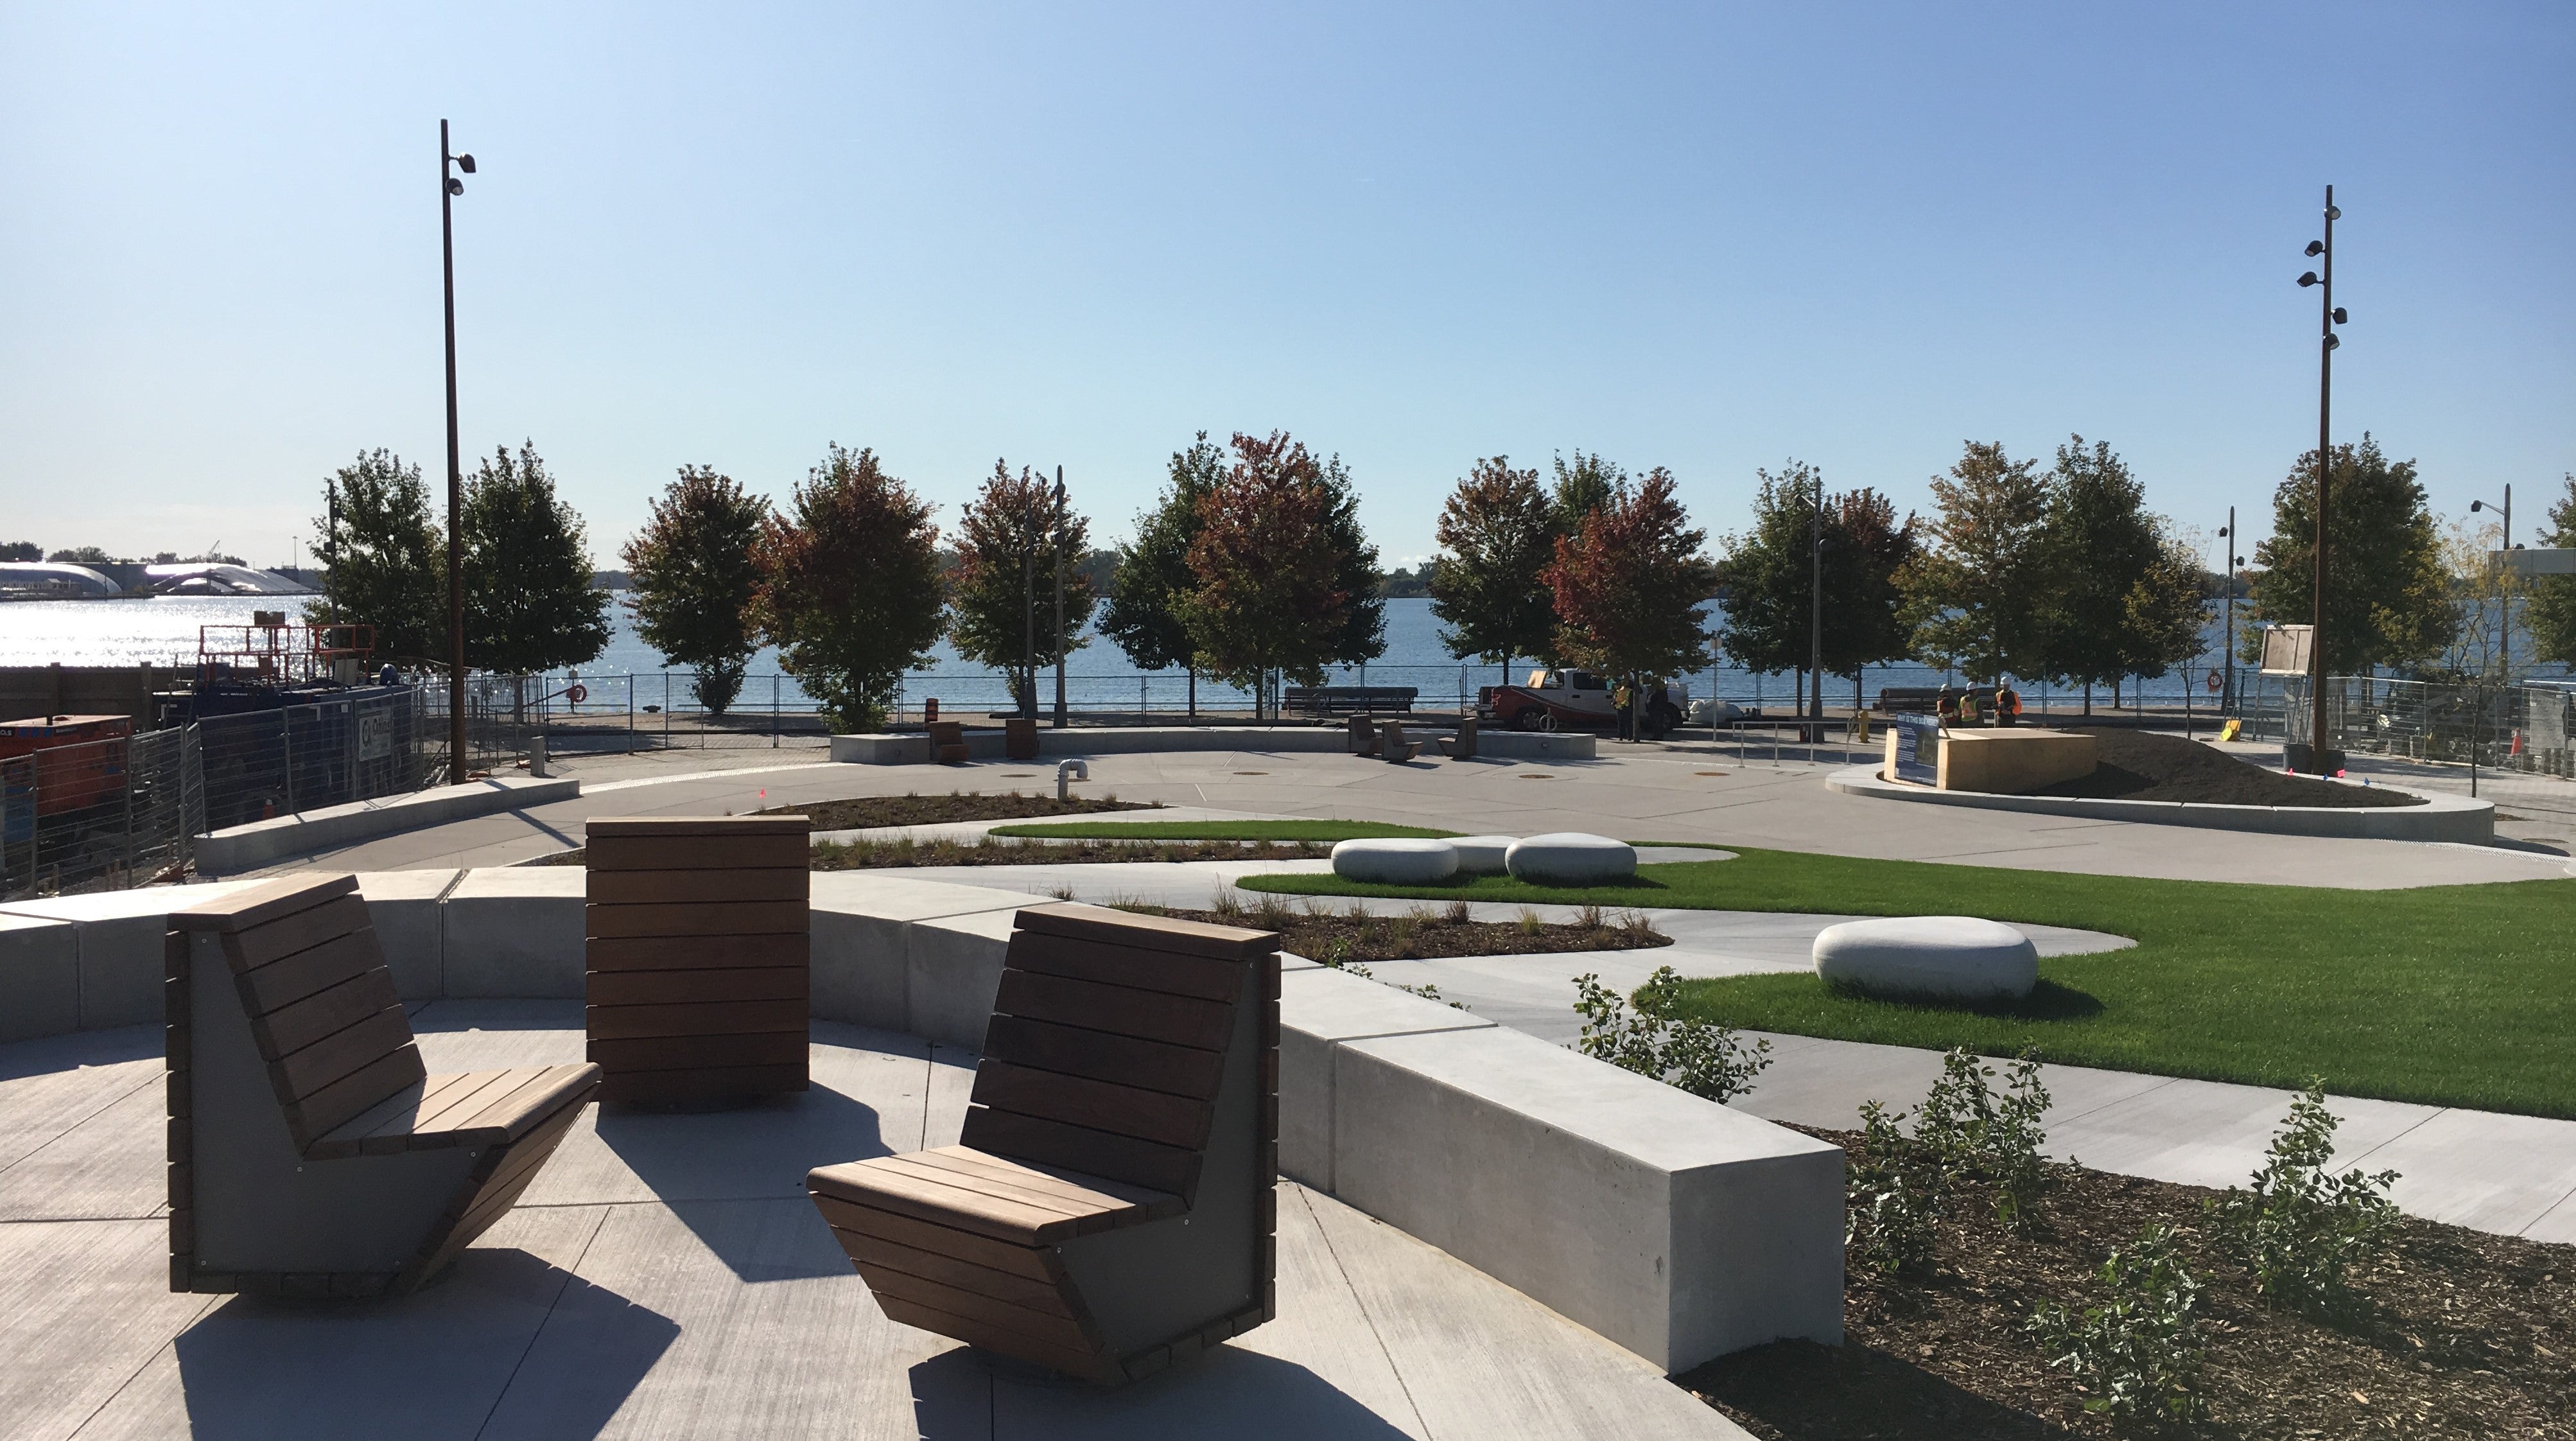 Waterfront Park – The waterfront for everyone.